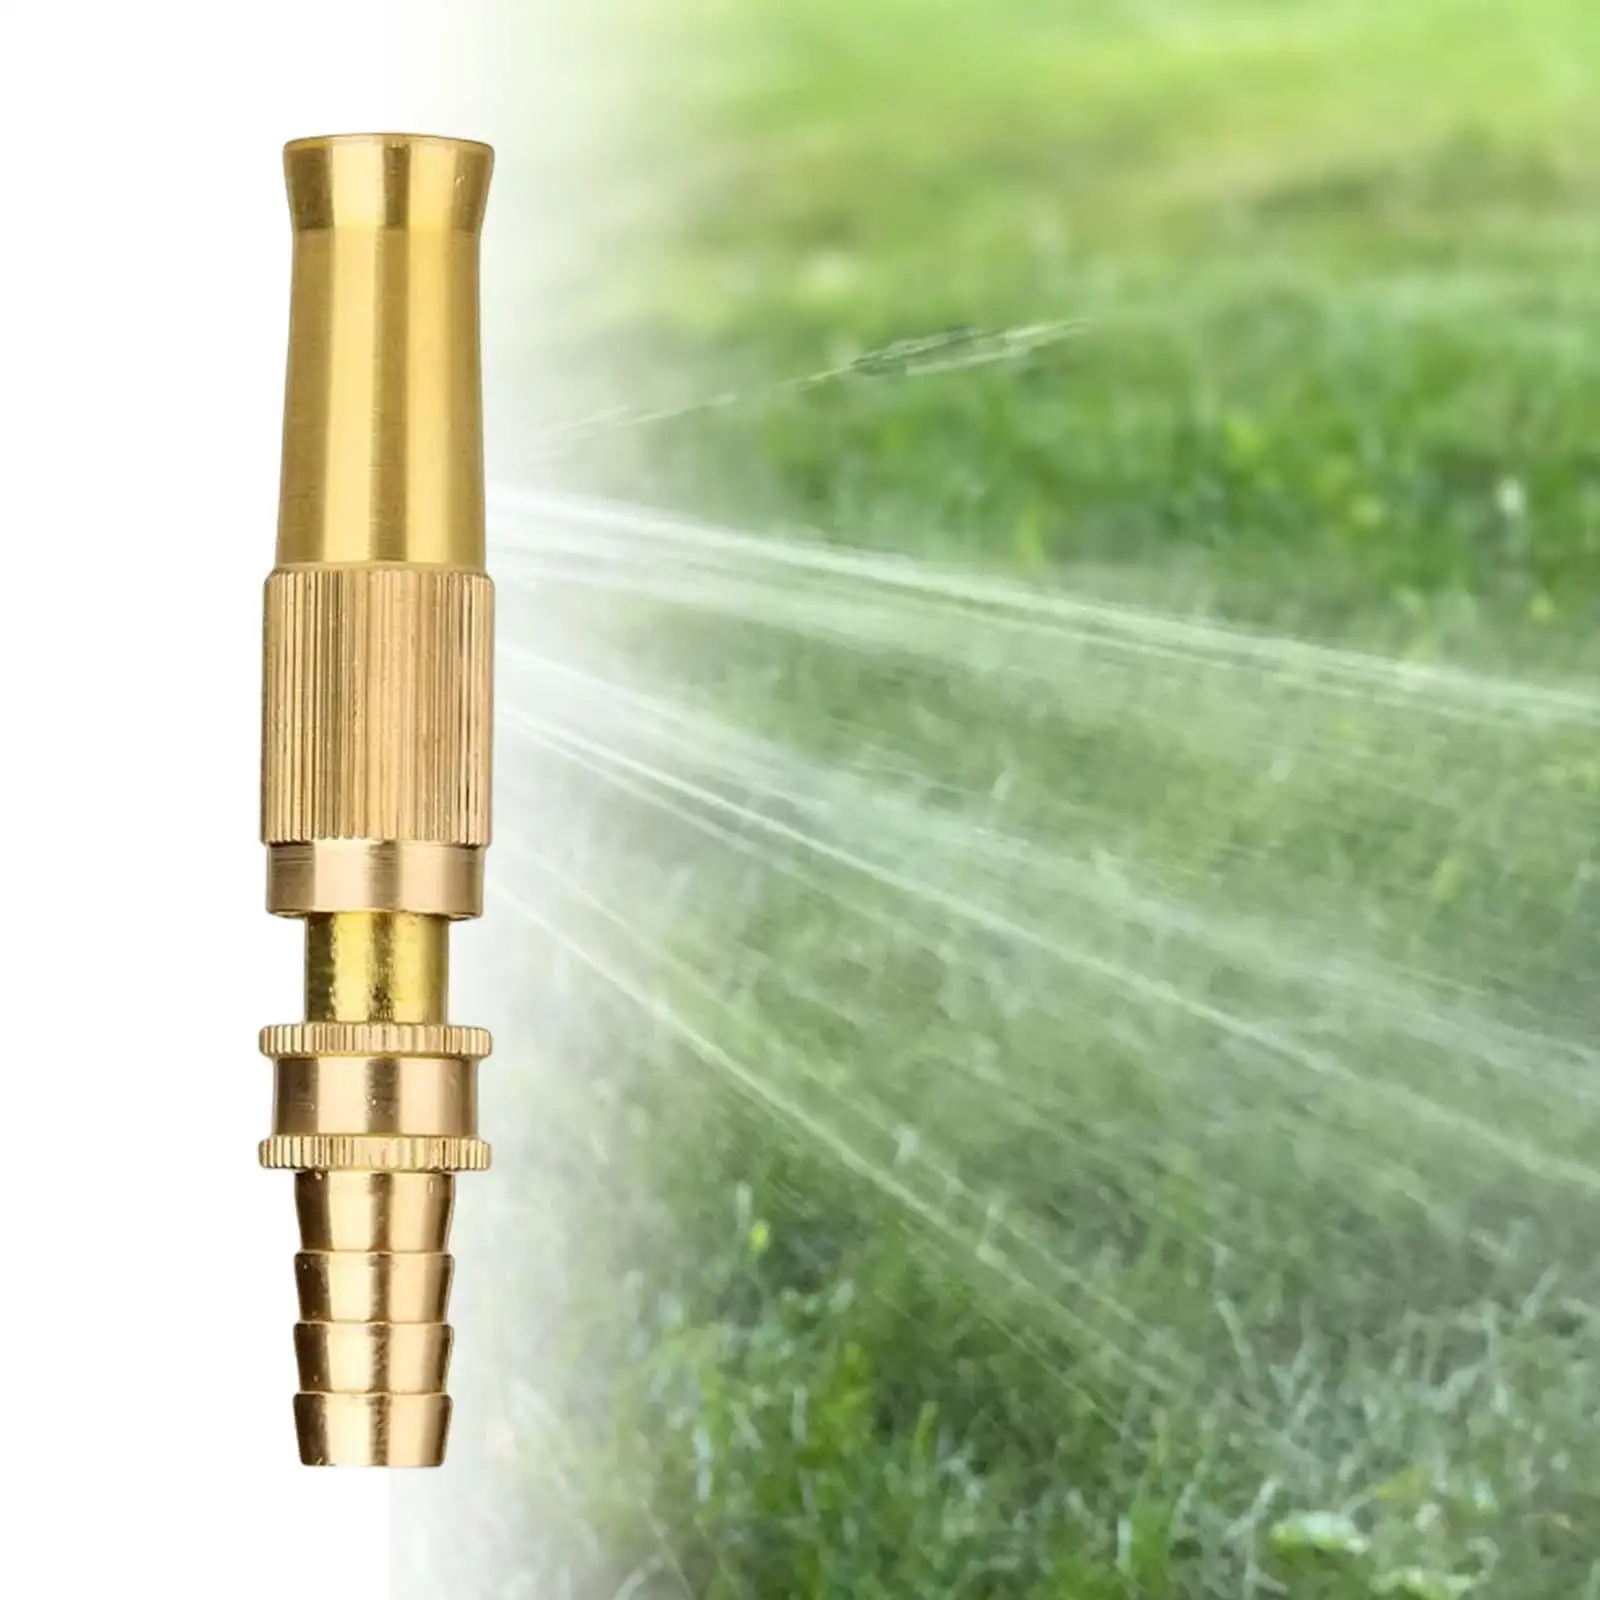 Copper Spray Nozzle Coupler Fittings Washer Wand Direct Spray Sprinkler for Deck Gardening Lawn Care Siding & Driveway Cleaning